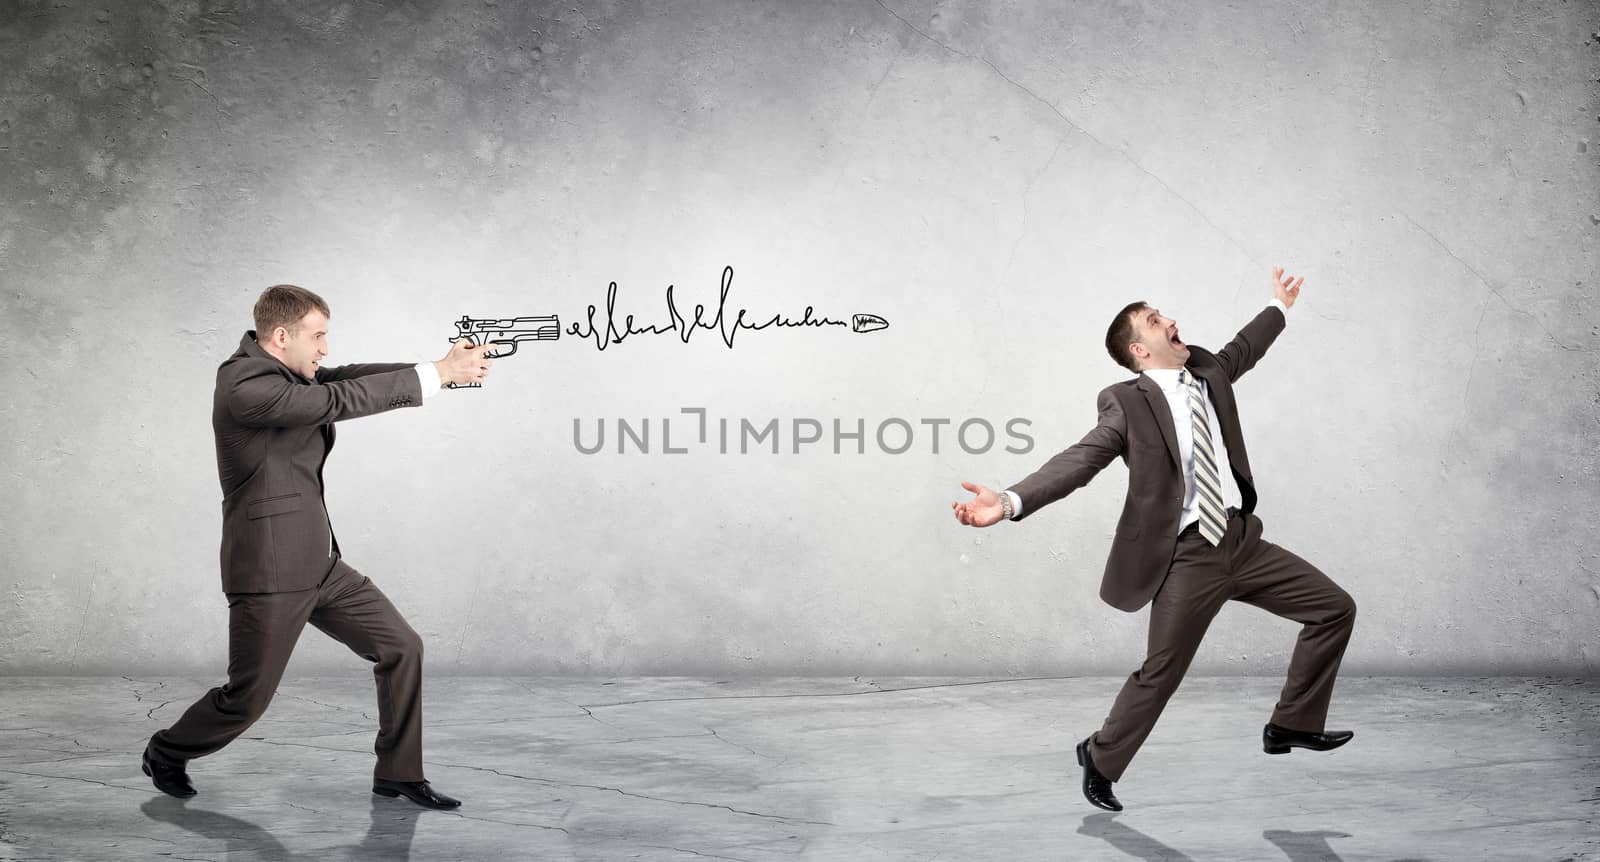 Businessman shooting  another man on grey wall background